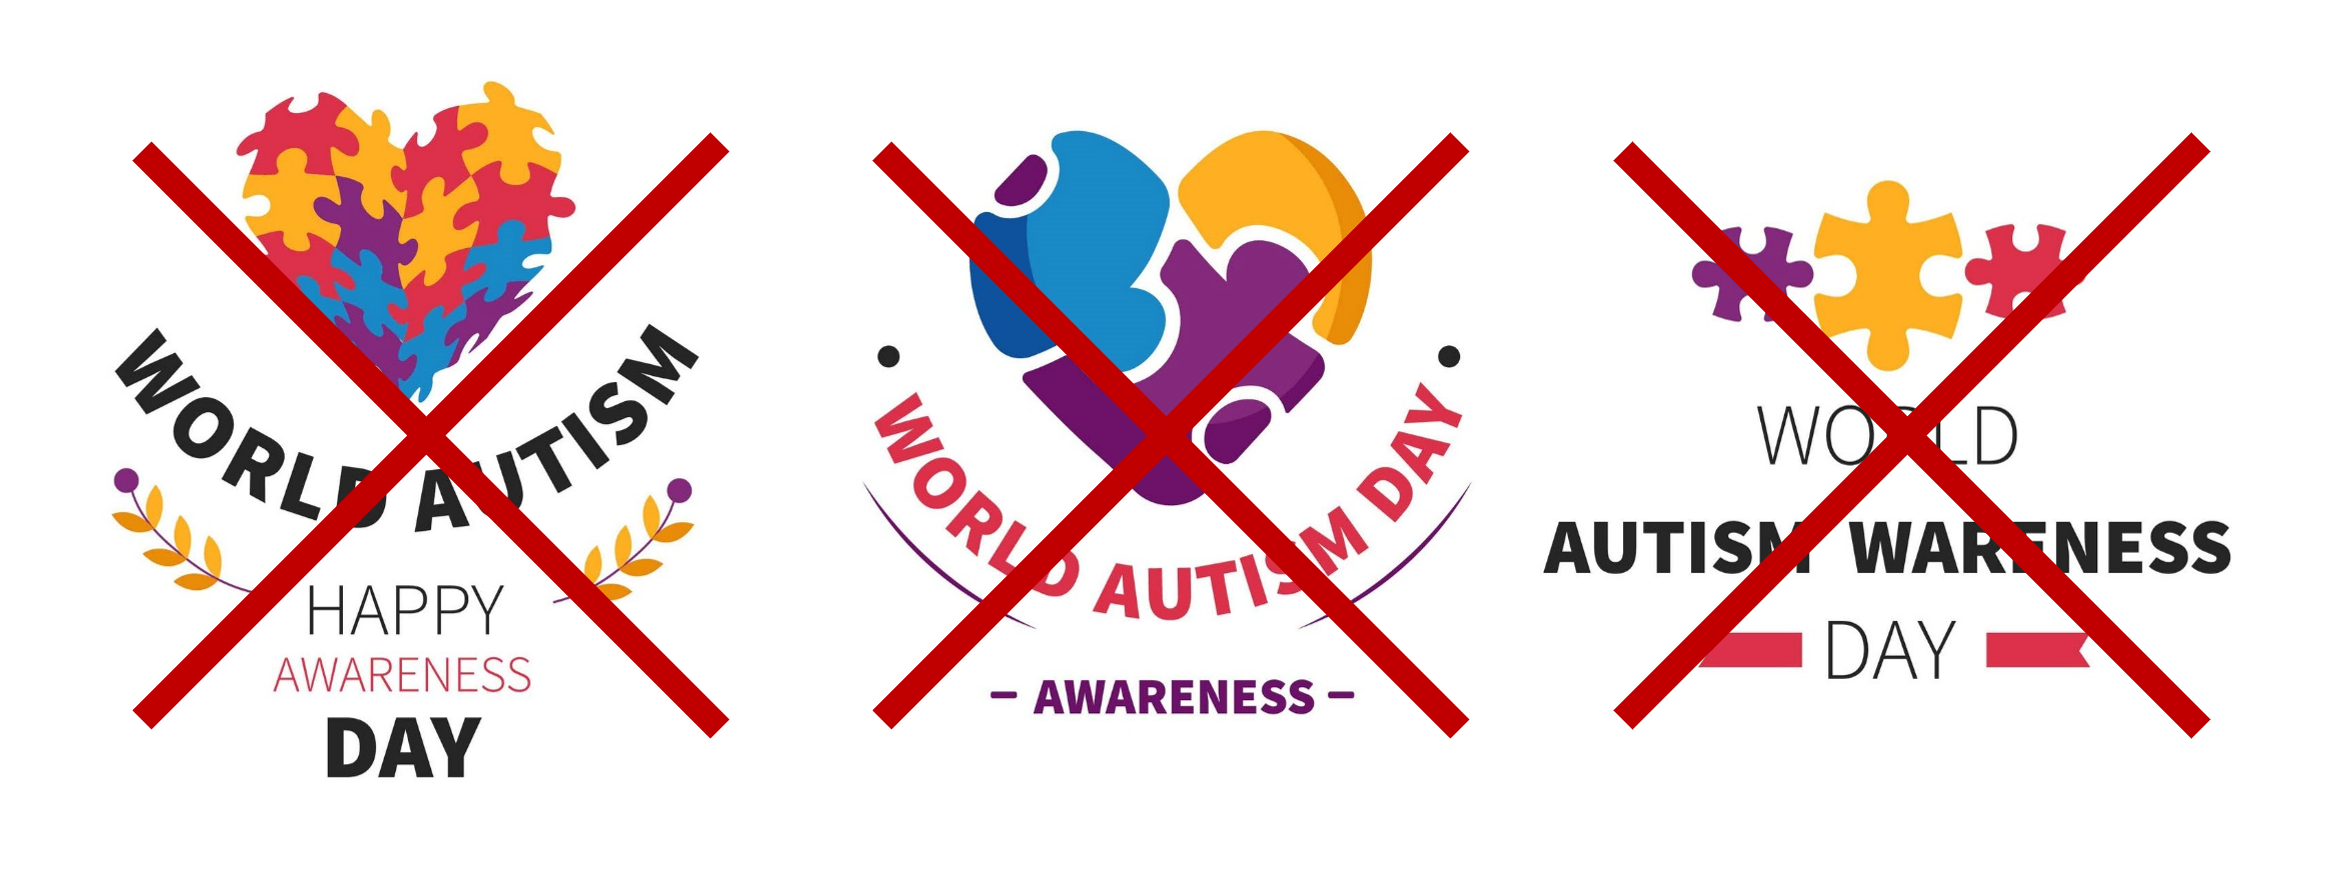 Do Not Use World Autism Day Awareness puzzle images